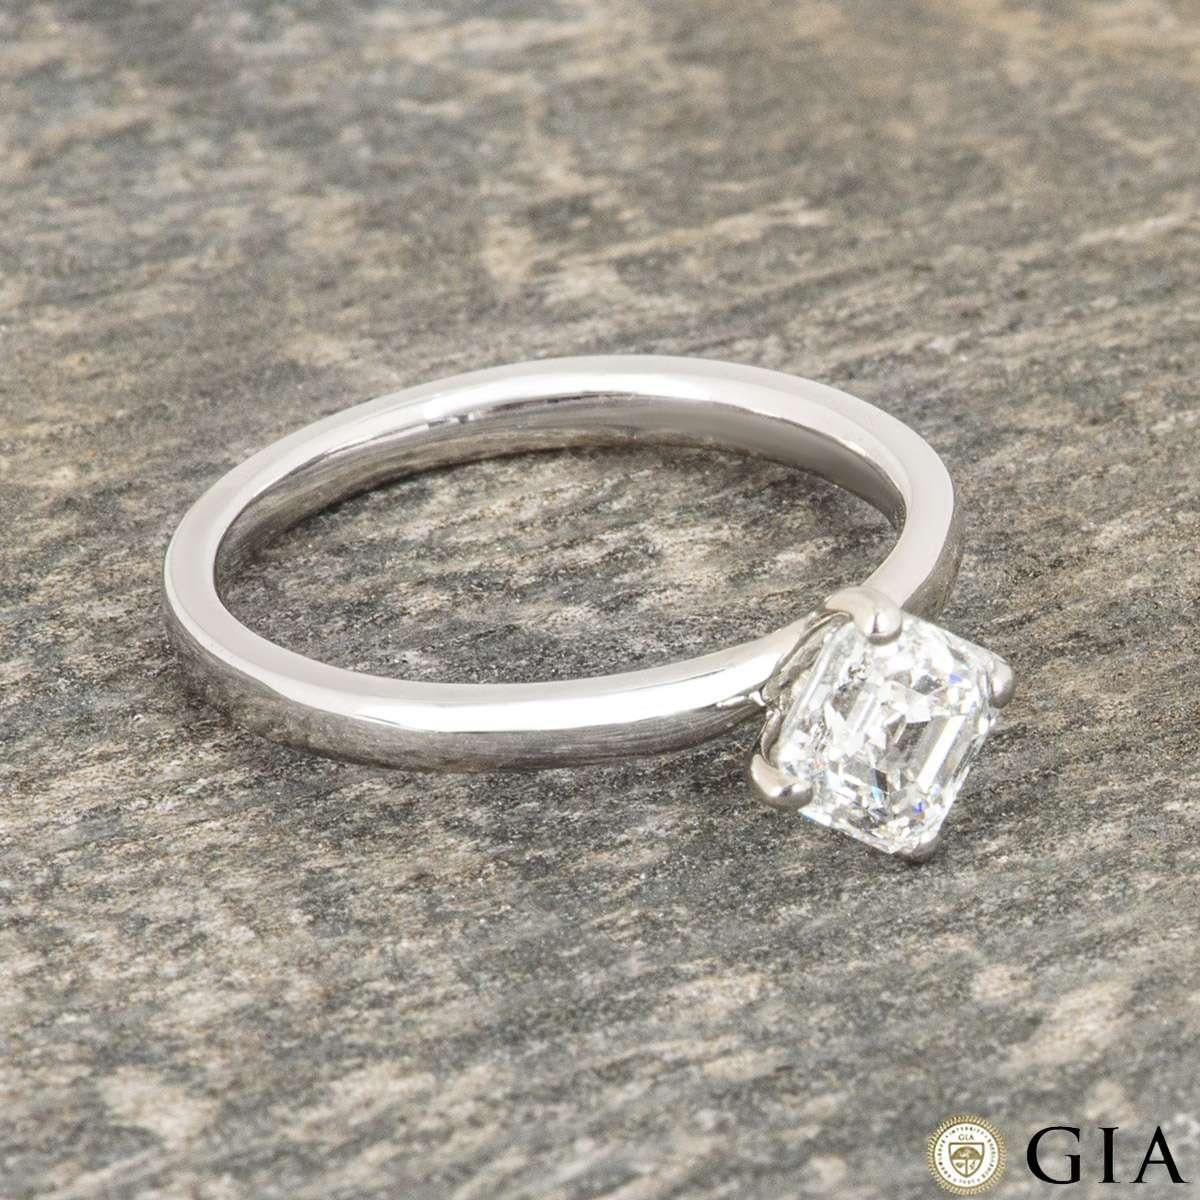 GIA Certified Asscher Cut Diamond Ring in Platinum 1.00ct G/VS2 For Sale 2